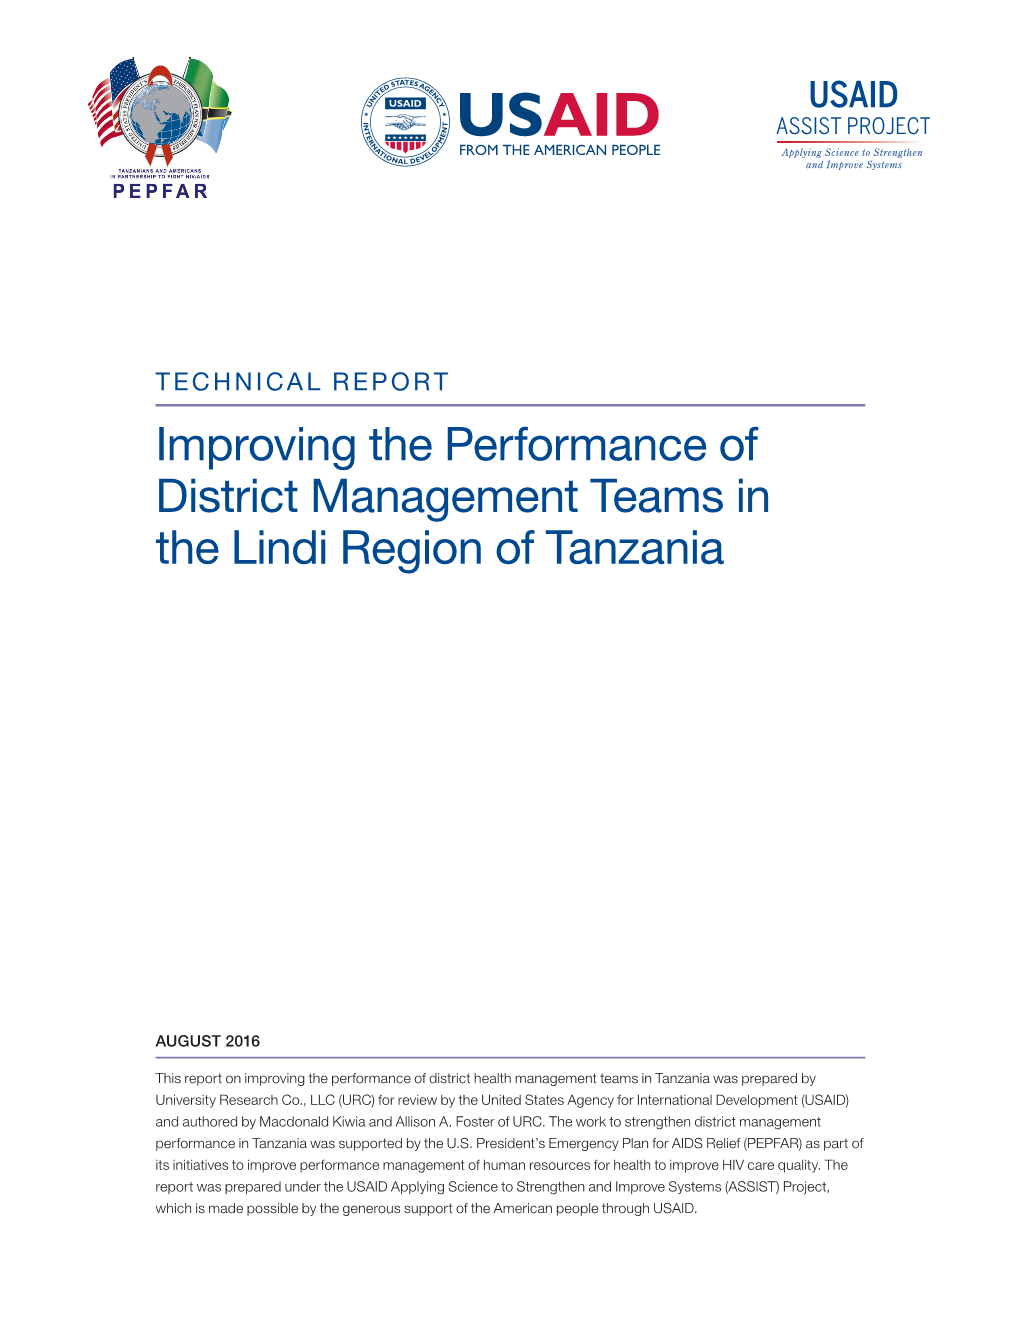 Improving the Performance of District Management Teams in the Lindi Region of Tanzania